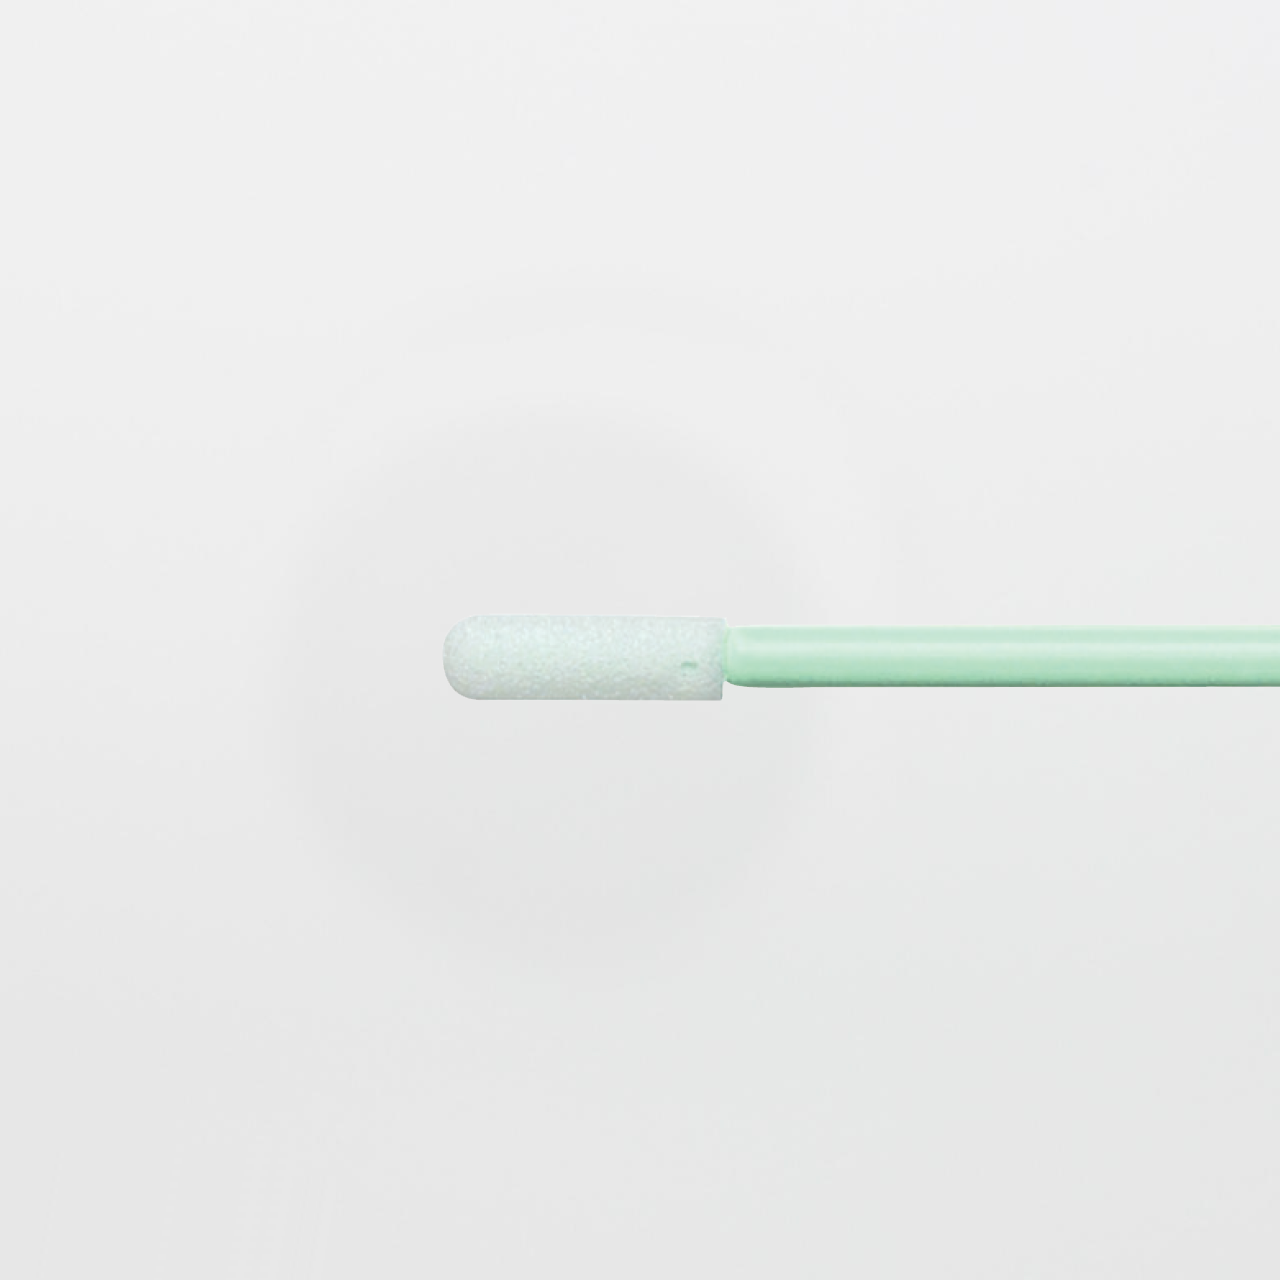 Micro Swabs with Bendable Tip